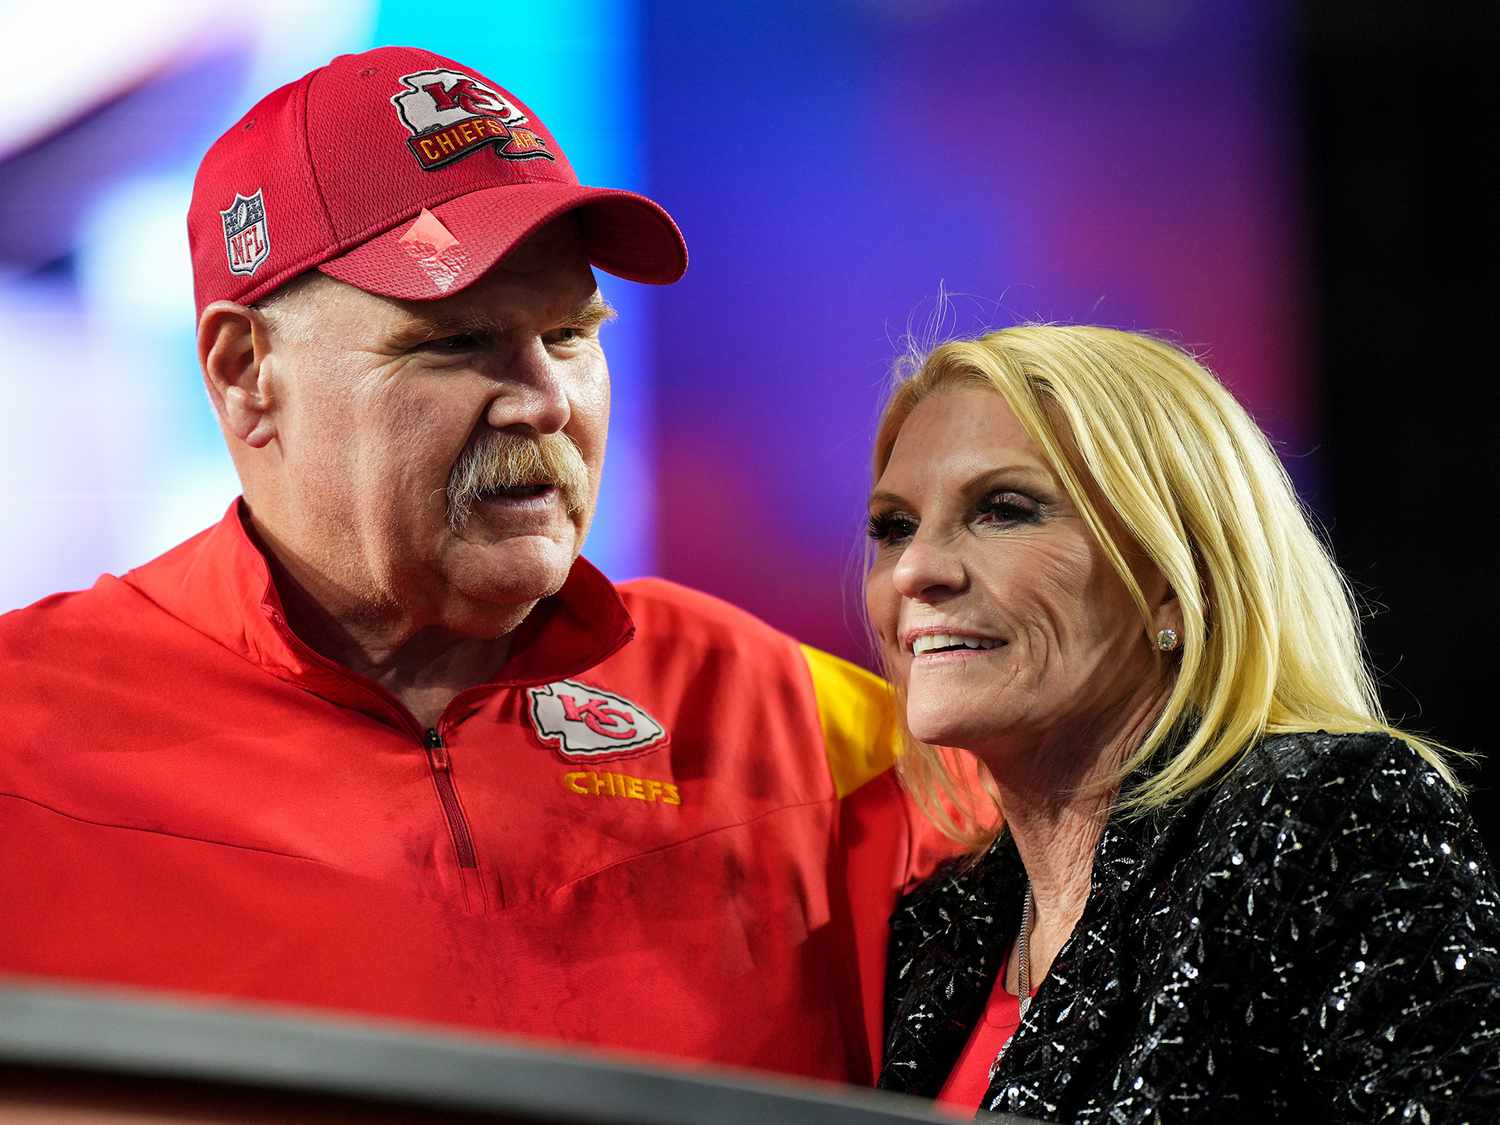 In tears, Chiefs' Andy Reid finally ends 45 years of marriage with his wife Tammy Reid, saying, 'We never saw our love ending this way.